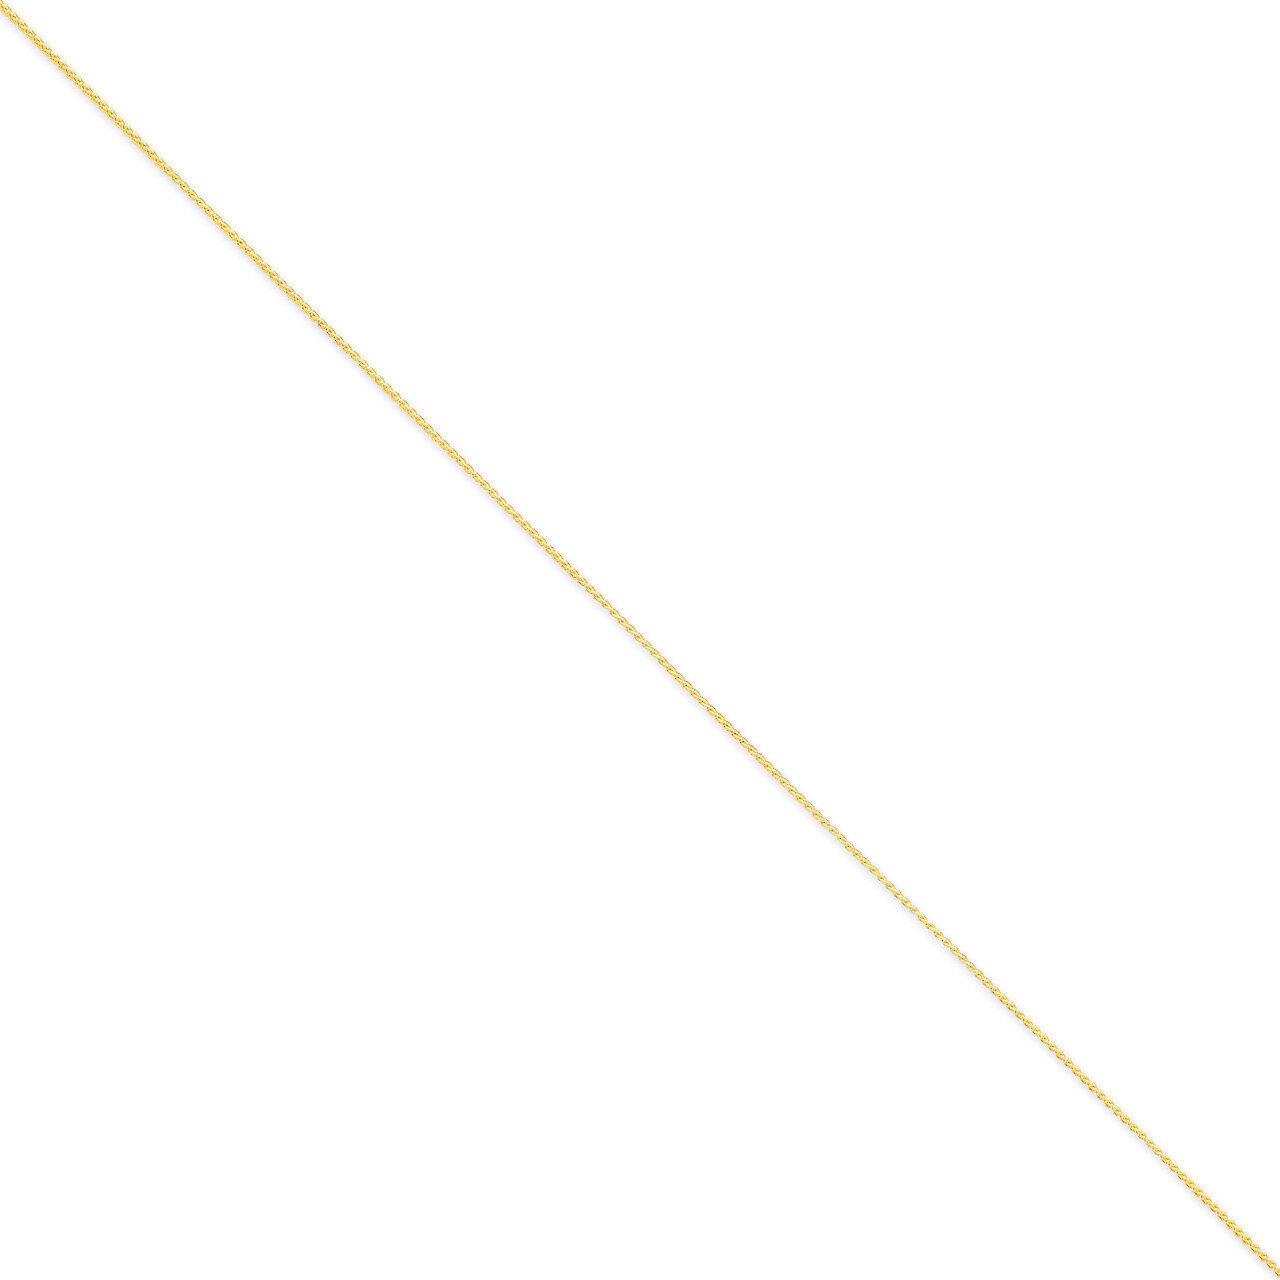 1.1mm Solid Polished Spiga Chain 18 Inch 14k Gold PEN259-18